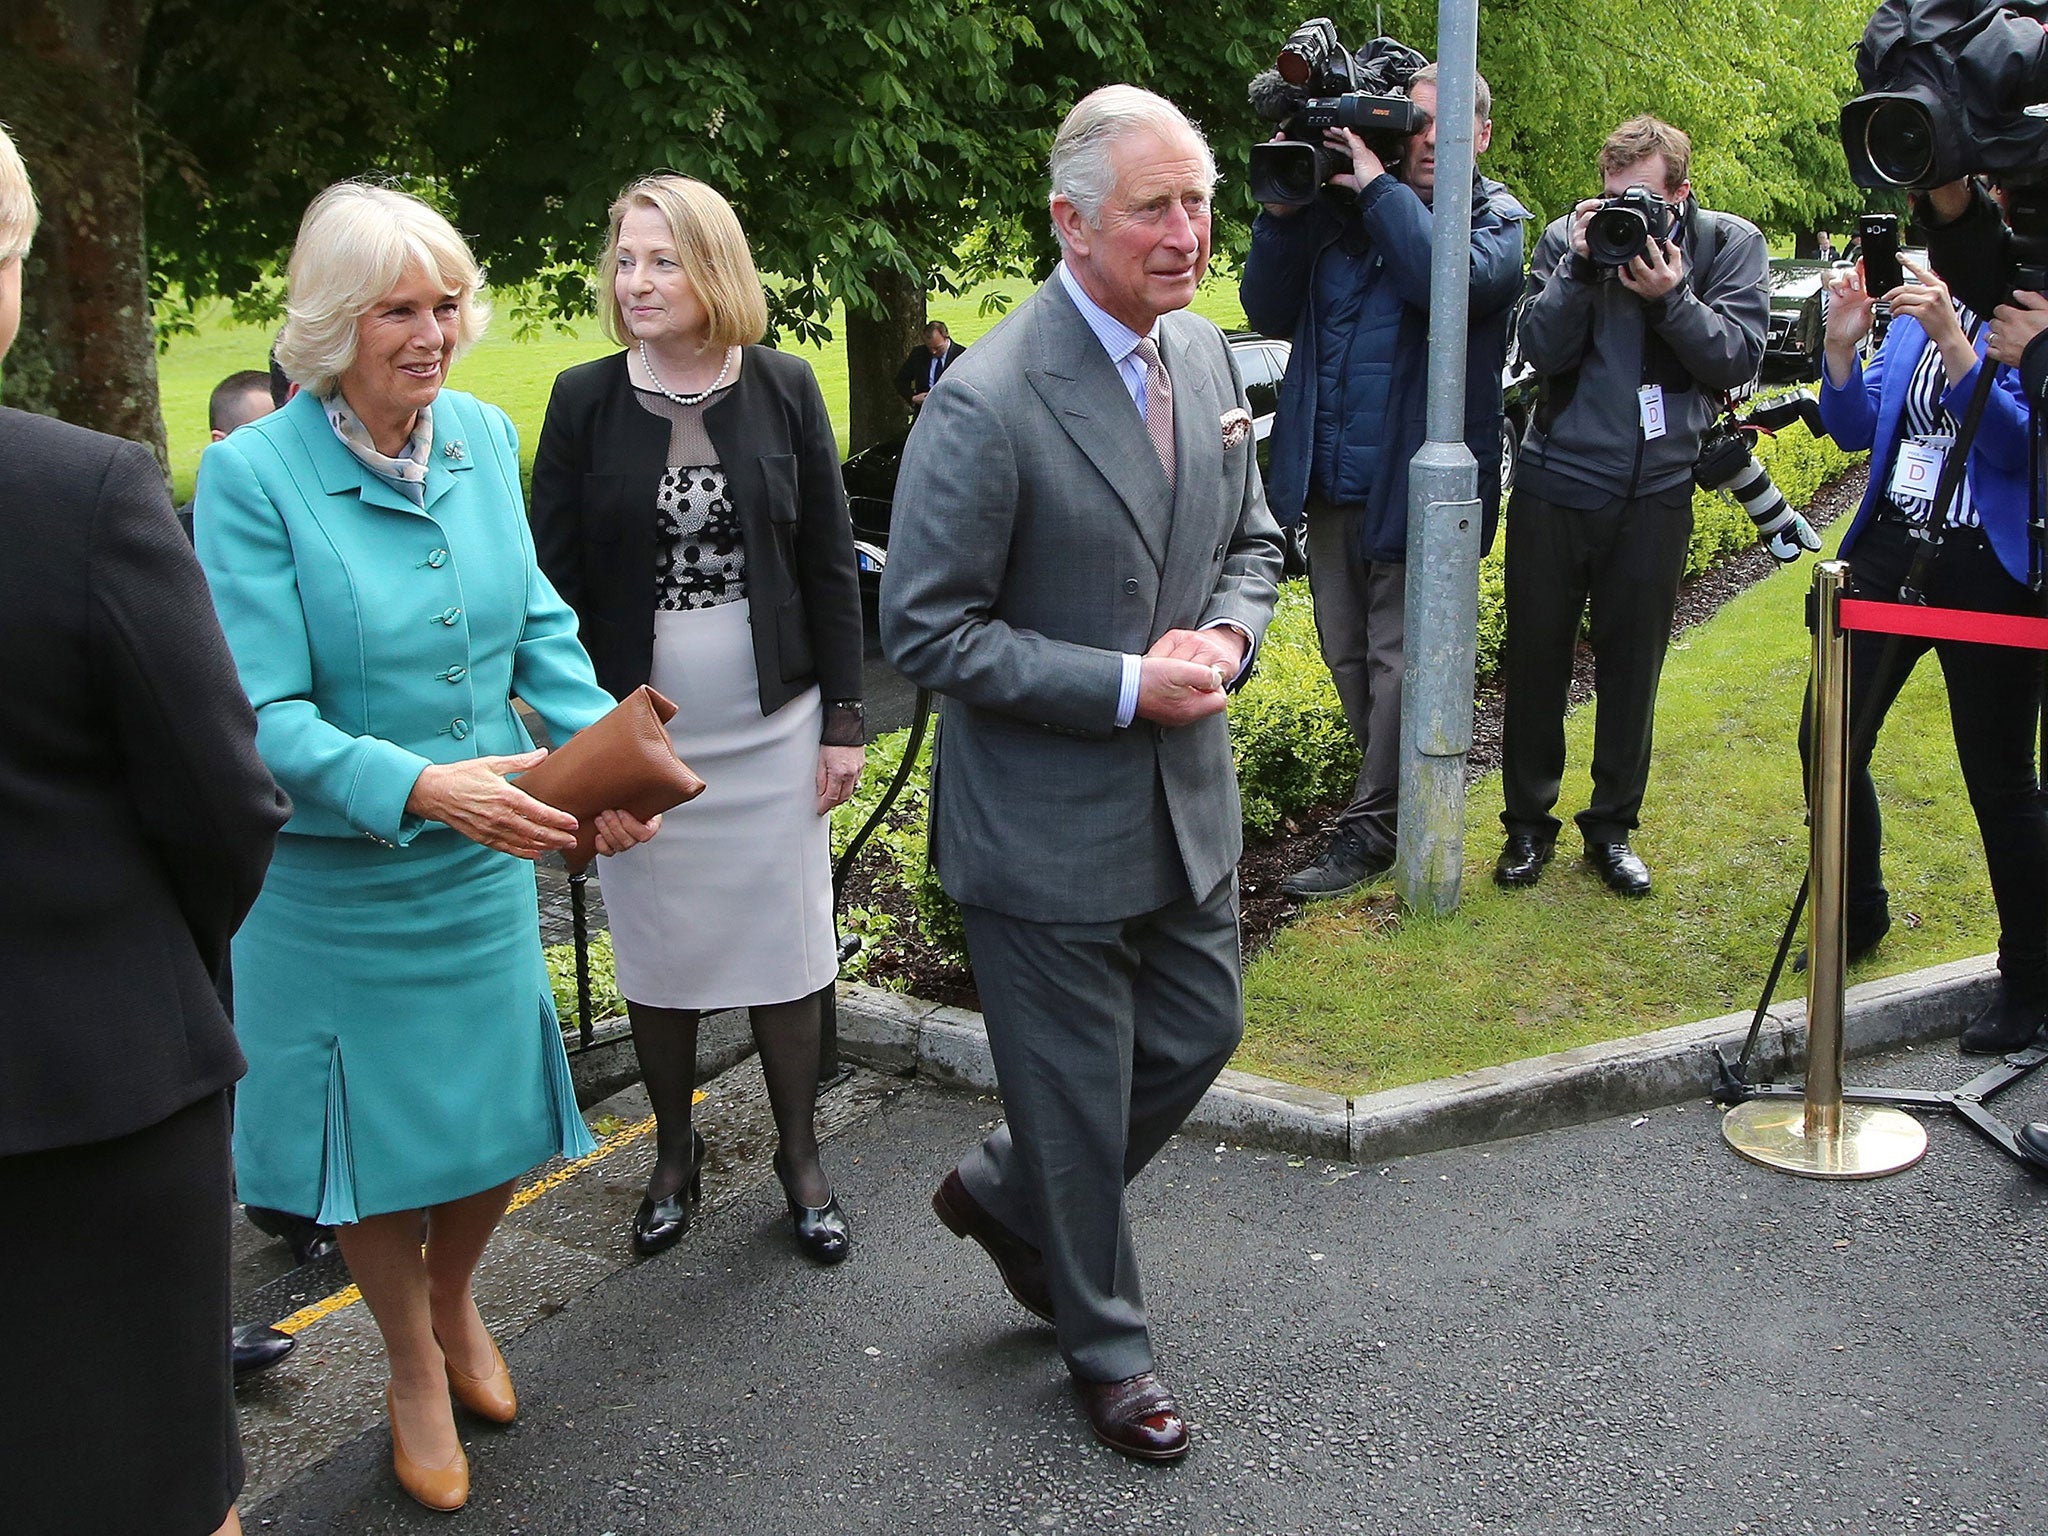 Prince Charles (centre) and Camilla Duchess of Cornwall (left) arrive at National University of Ireland, Galway, Ireland